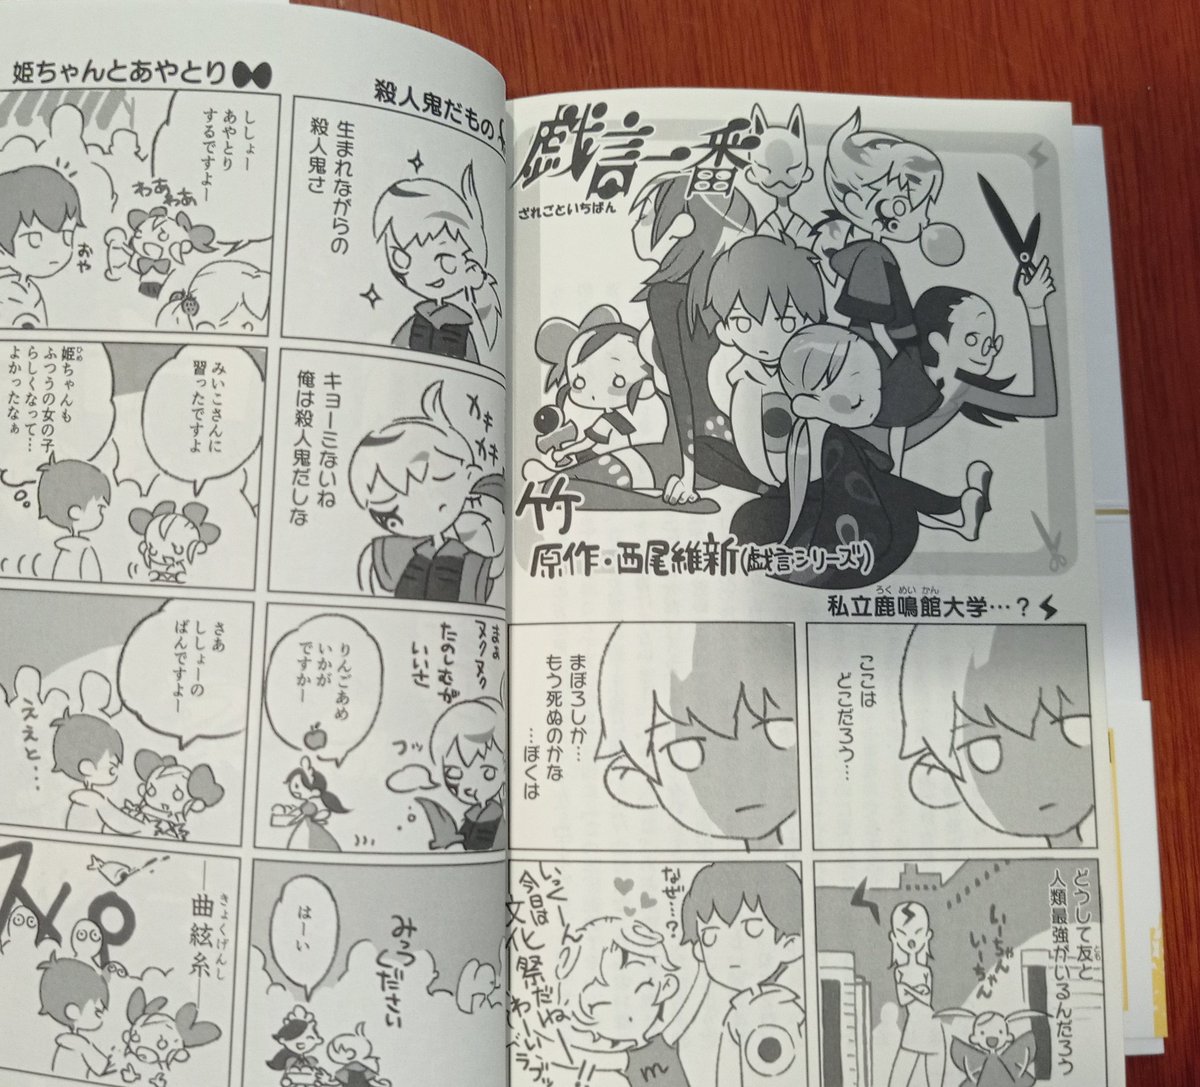 The Zaregoto dictionary is about terms used throughout the series and at the end it has some cute 4 koma manga